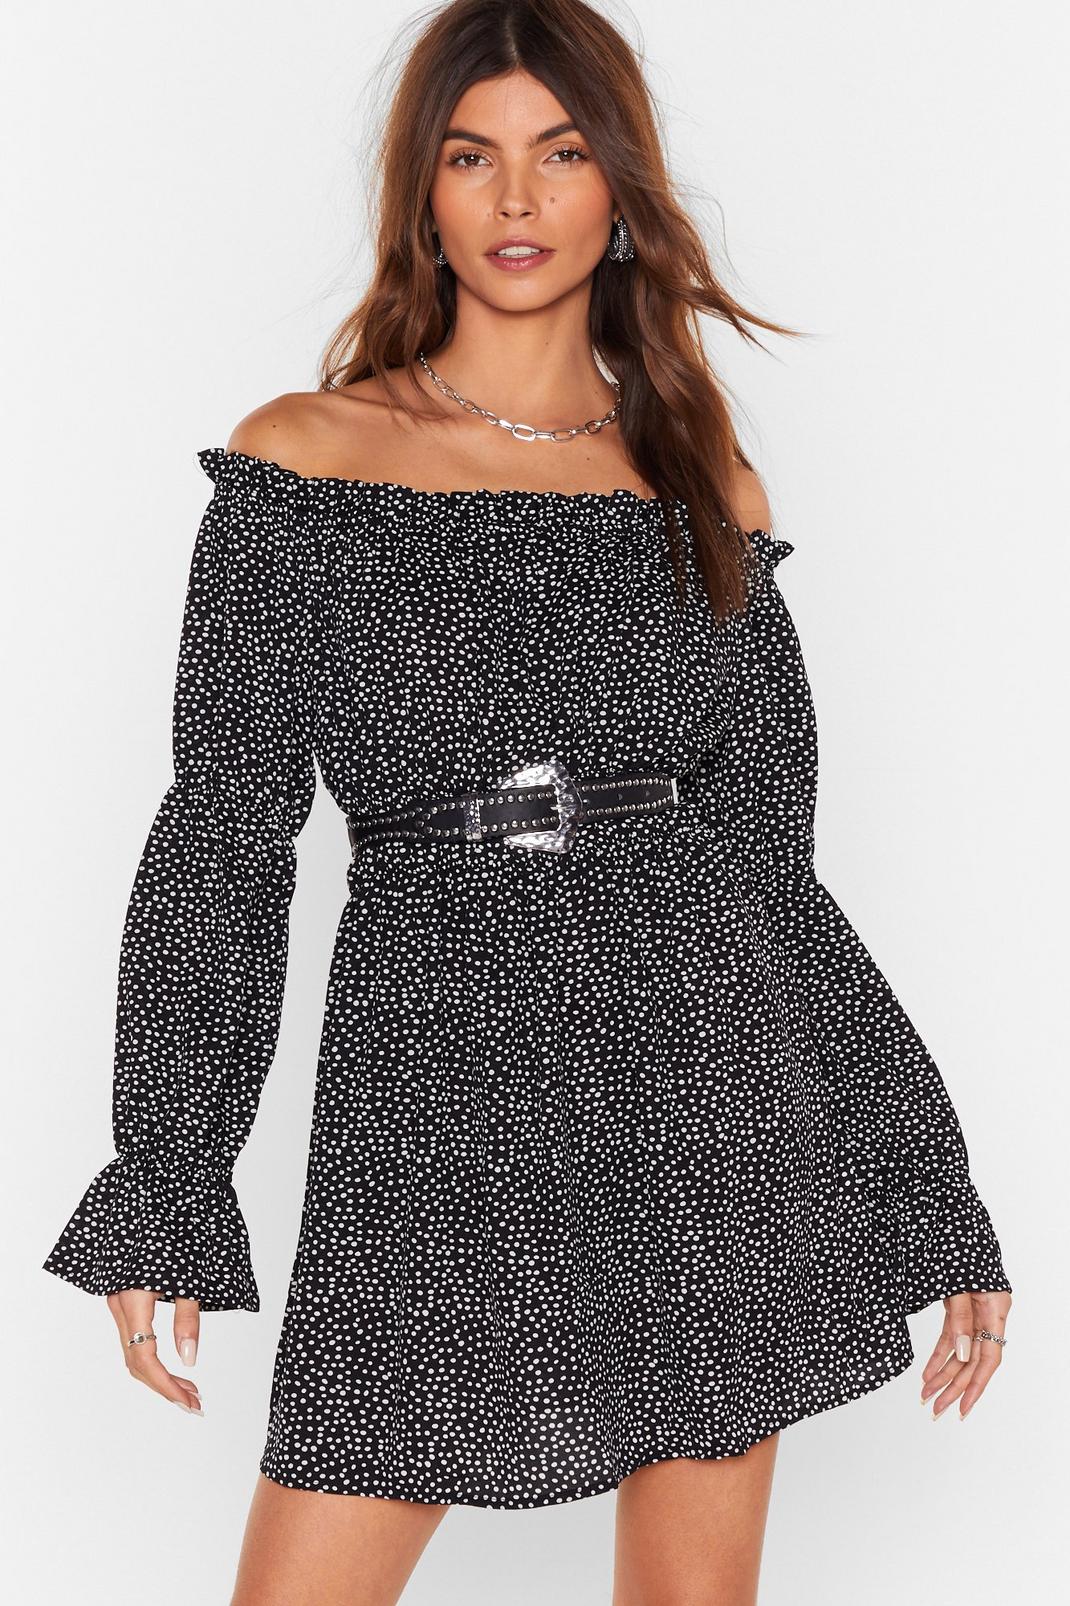 Polka Dot Off-The-Shoulder Mini Dress with Ruffled Edges image number 1